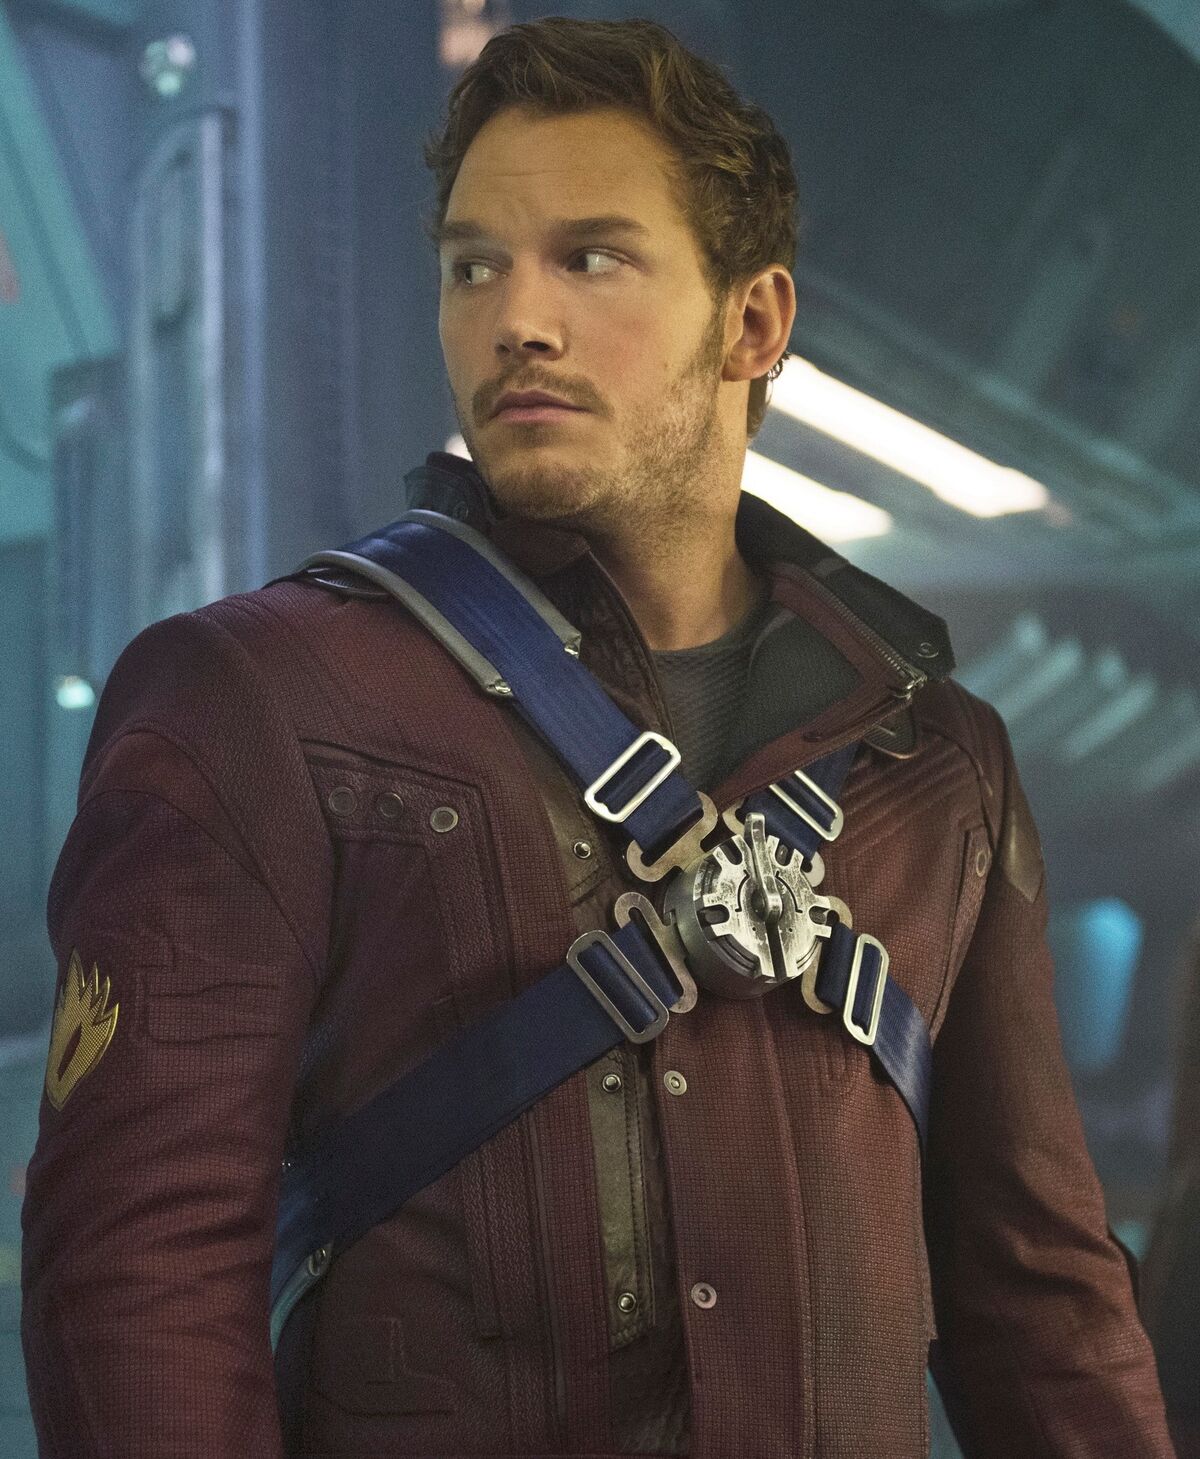 Aubree on X: Hey @prattprattpratt did you know that on the Disney Princess  Fandom Wiki, that Star-Lord is a Disney Prince? And that Tarzan and  Hercules aren't?!? (@actual_spidey @THOR_SON_OFODIN what do you